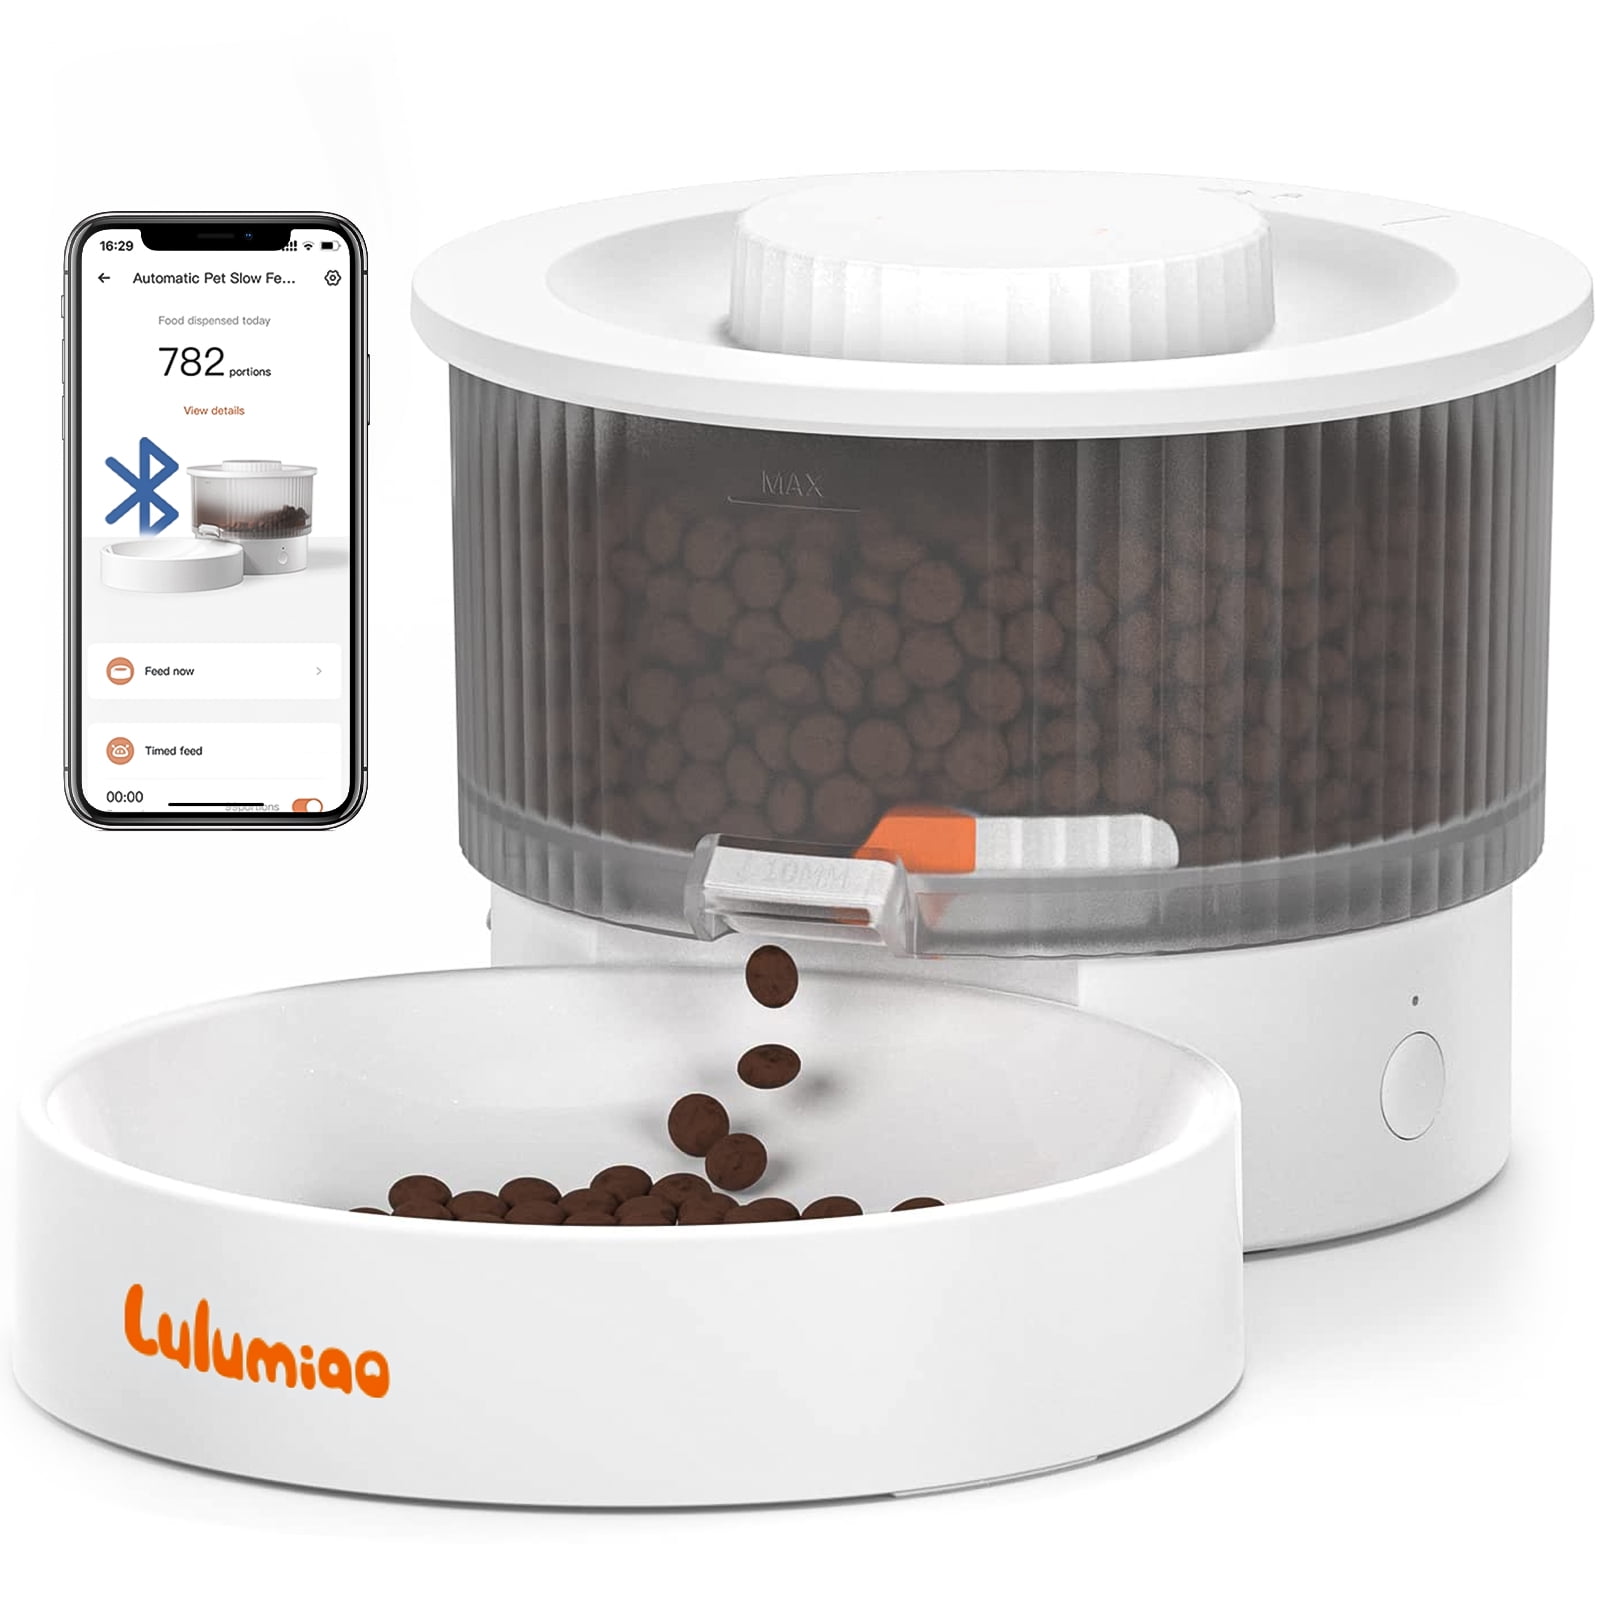 Lulumiao Automatic Cat Feeders with Slow Dispensing, Healthier Timed Cat Food Dispenser Prevents Bloating for Small Dog, Customized Feeding Schedule, Dual Powered, APP Control Up to 99 Portion 10 Meal